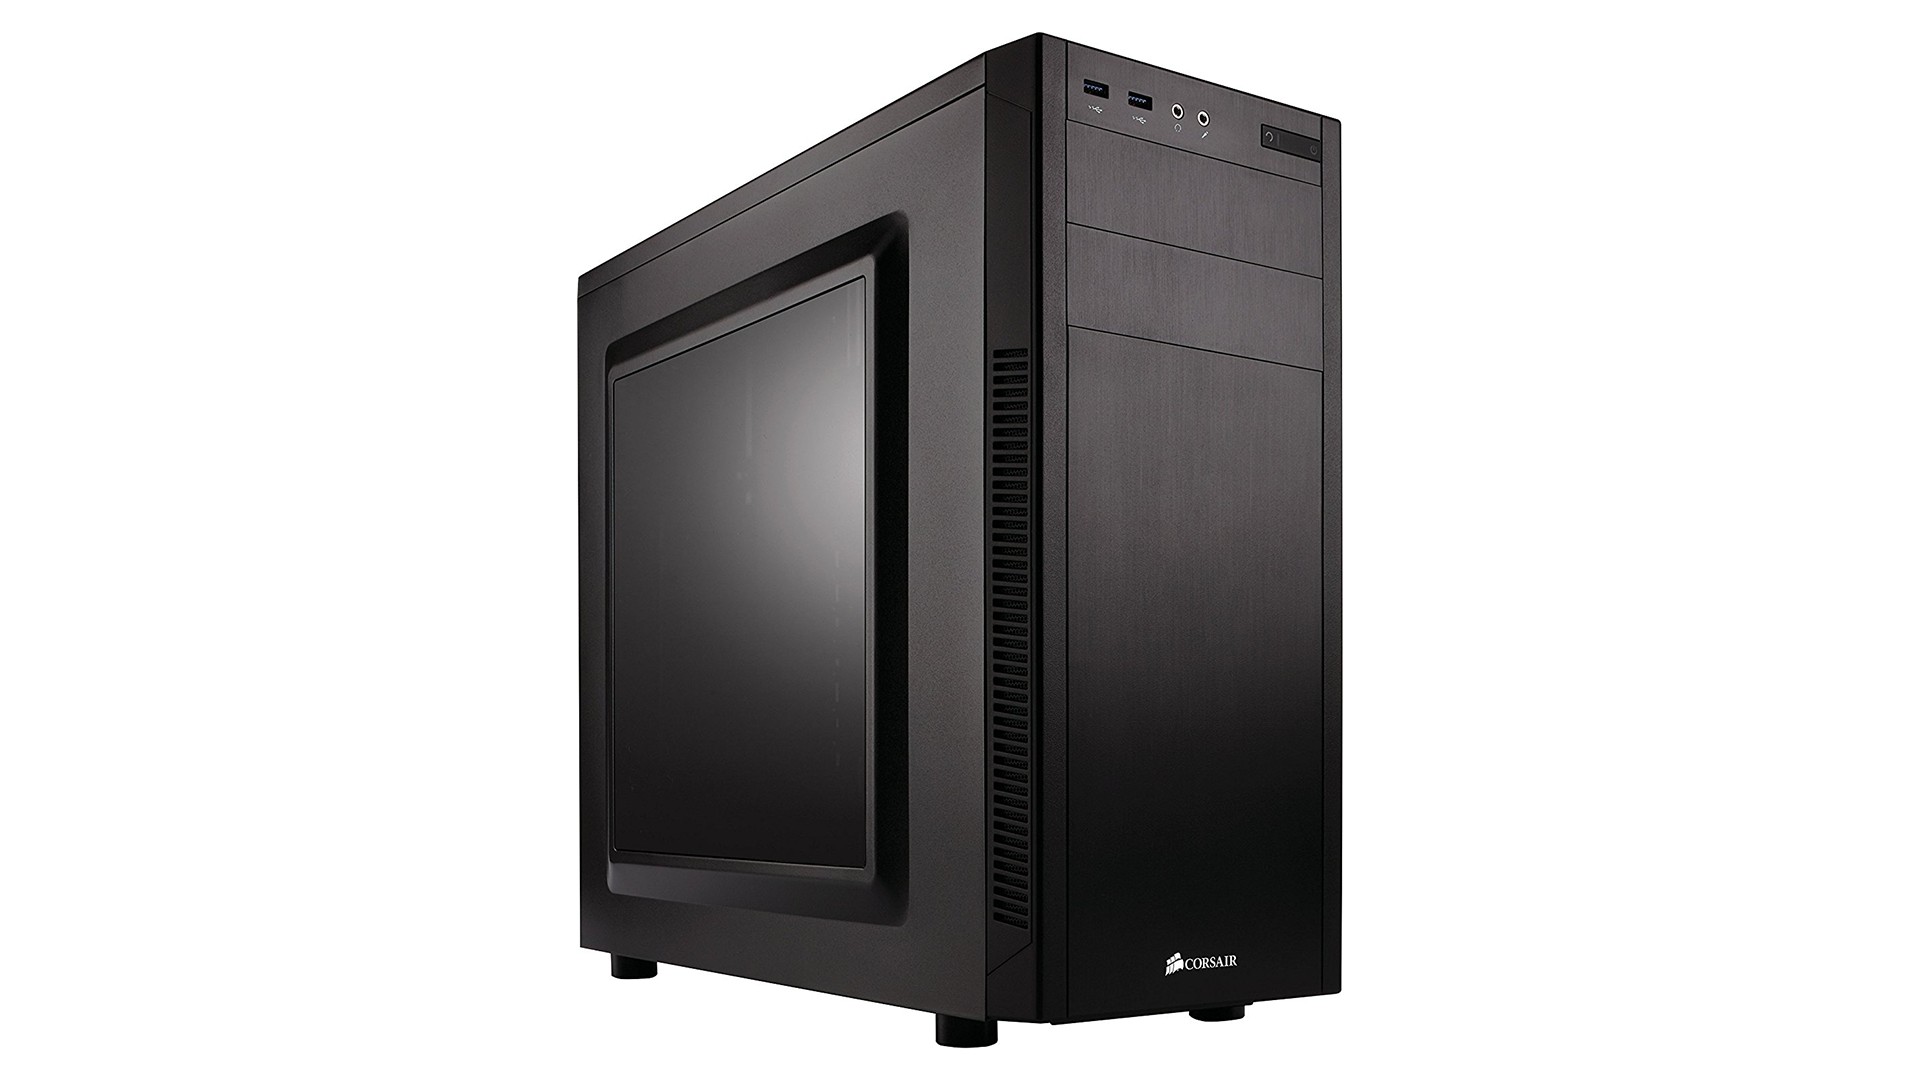 Best cheap gaming PC 2021 – build a 1080p AMD rig for under $600